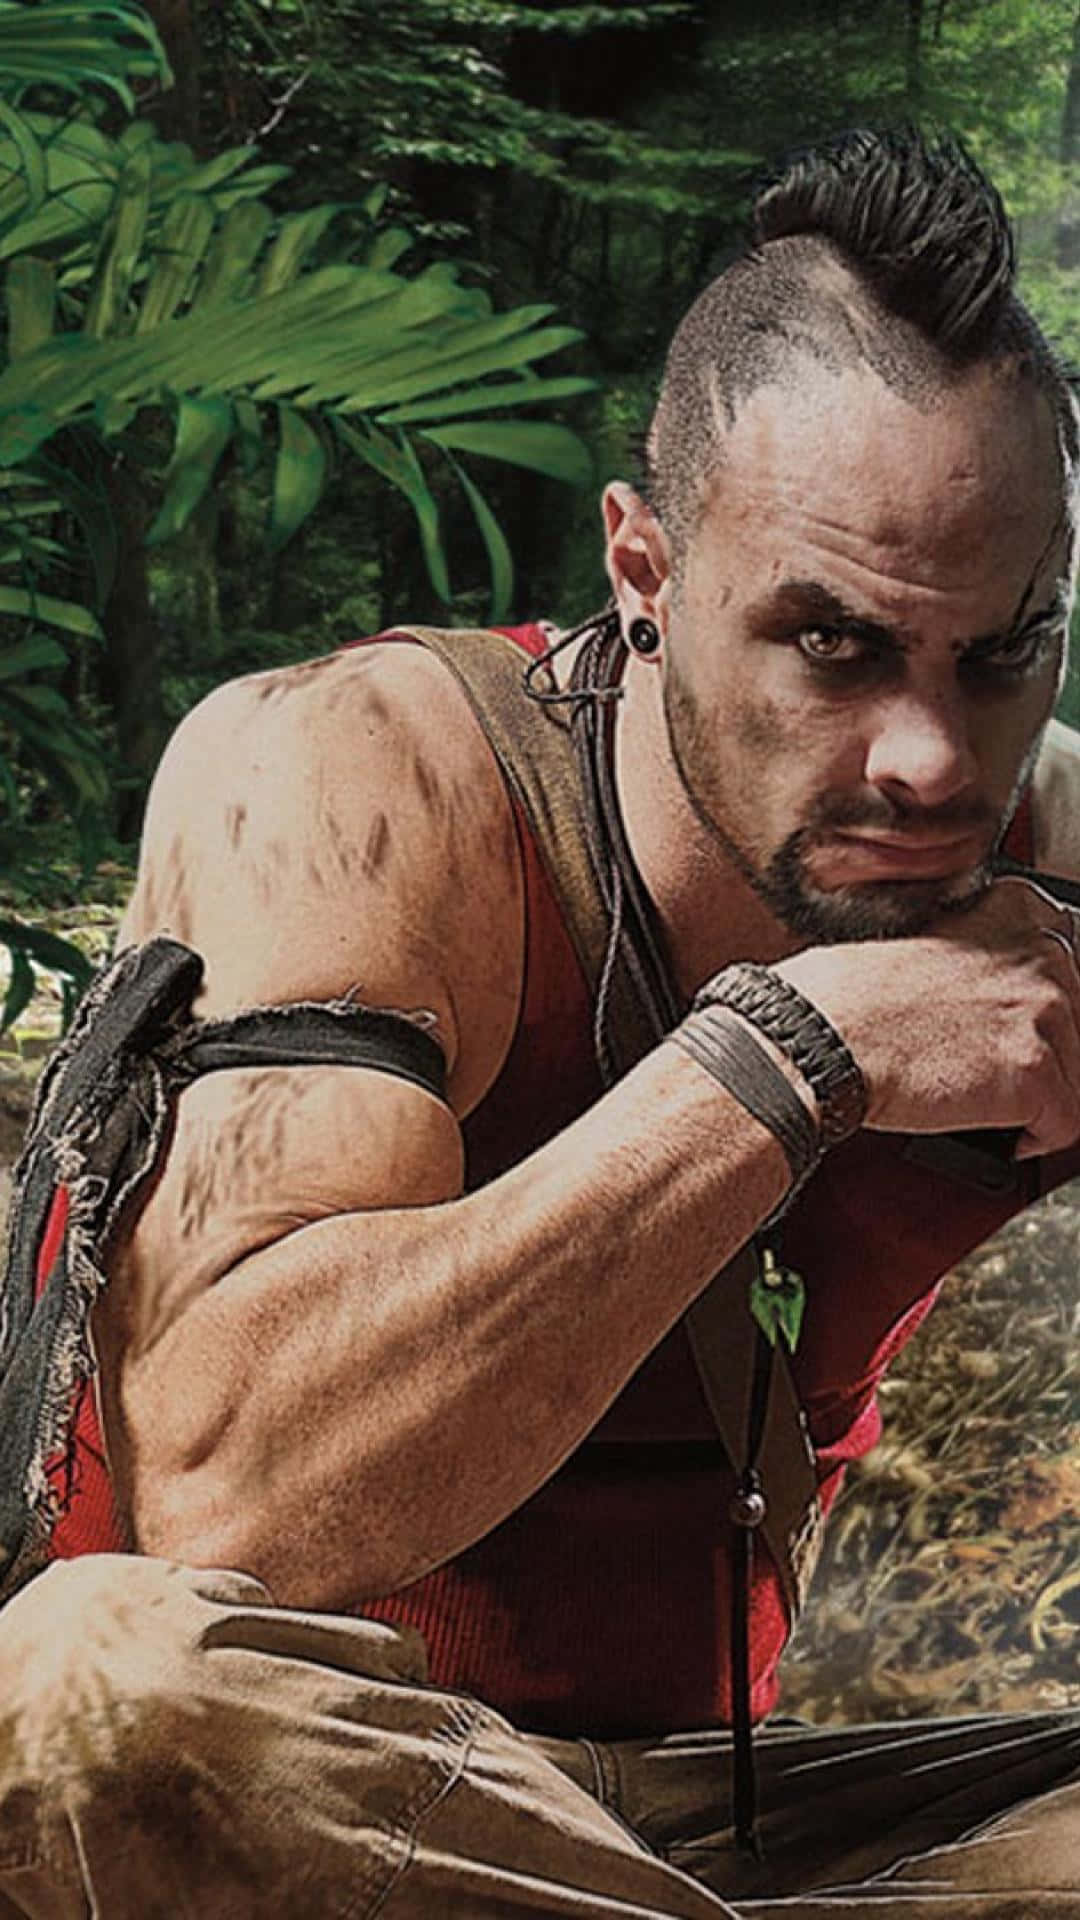 Play the thrilling Far Cry 3 game on your new Iphone Xs!